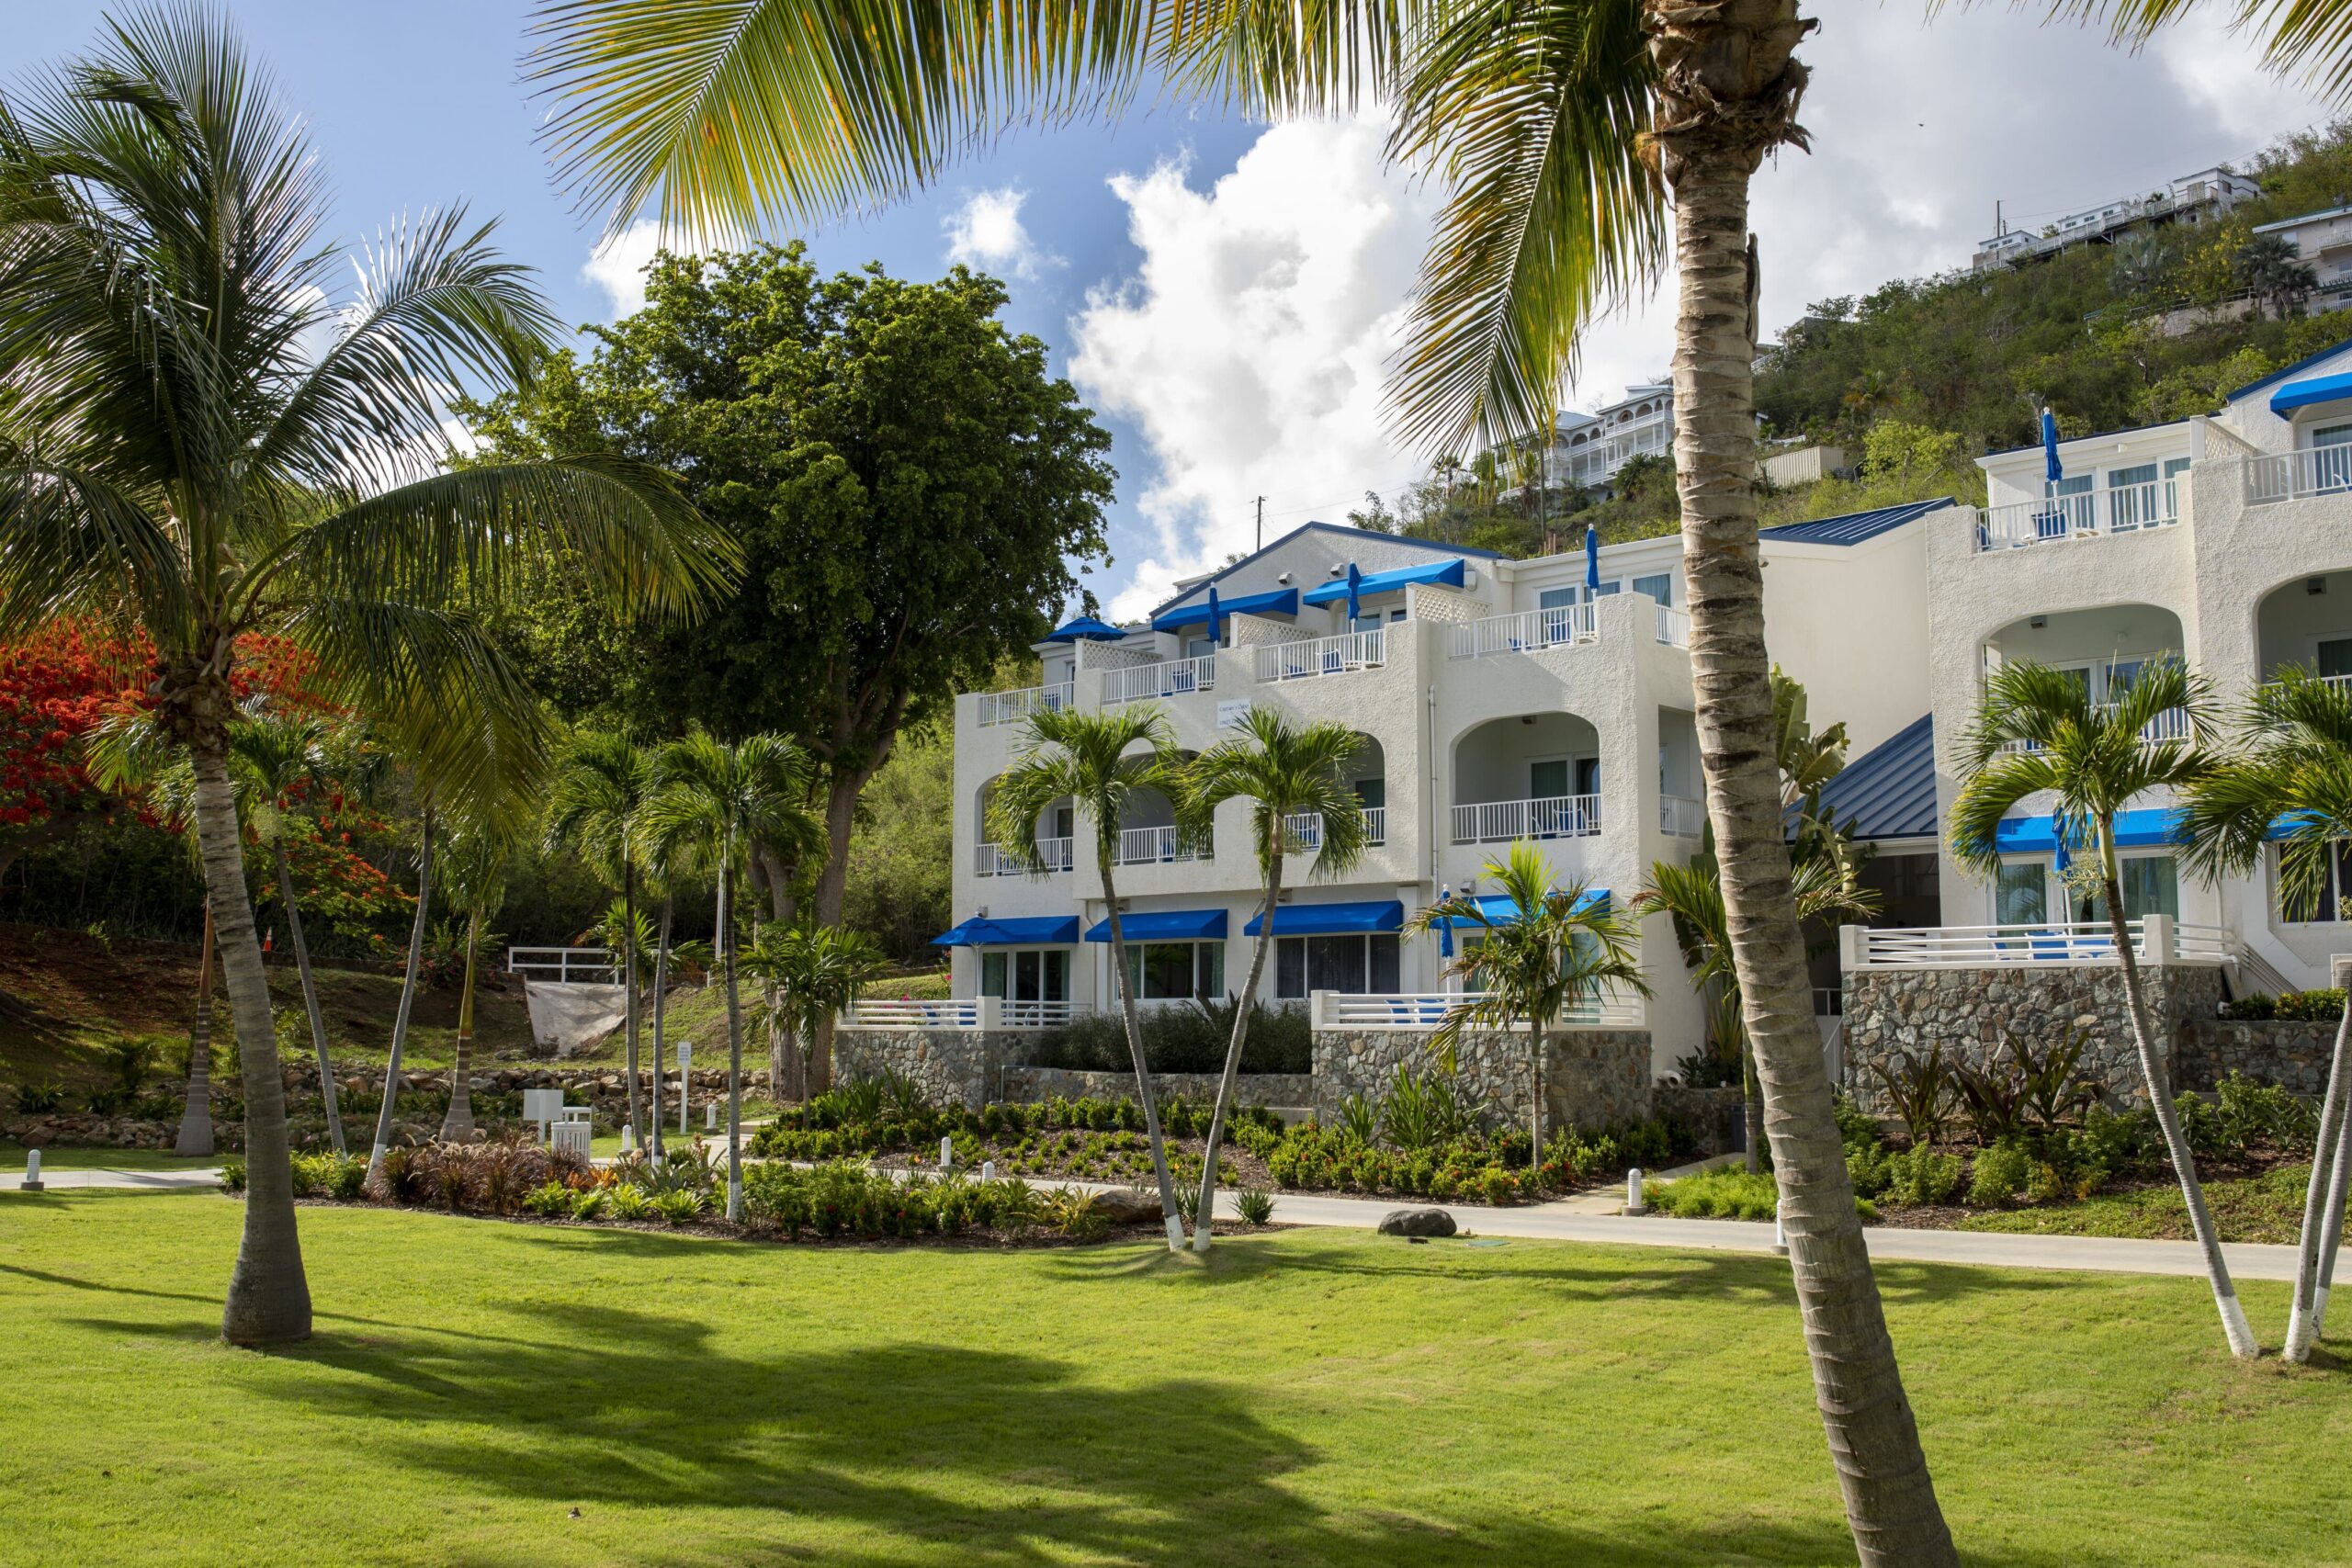 Wyndham Destinations Reopens 2 Resorts In St. Thomas: Limetree and Elysian Beach Resorts